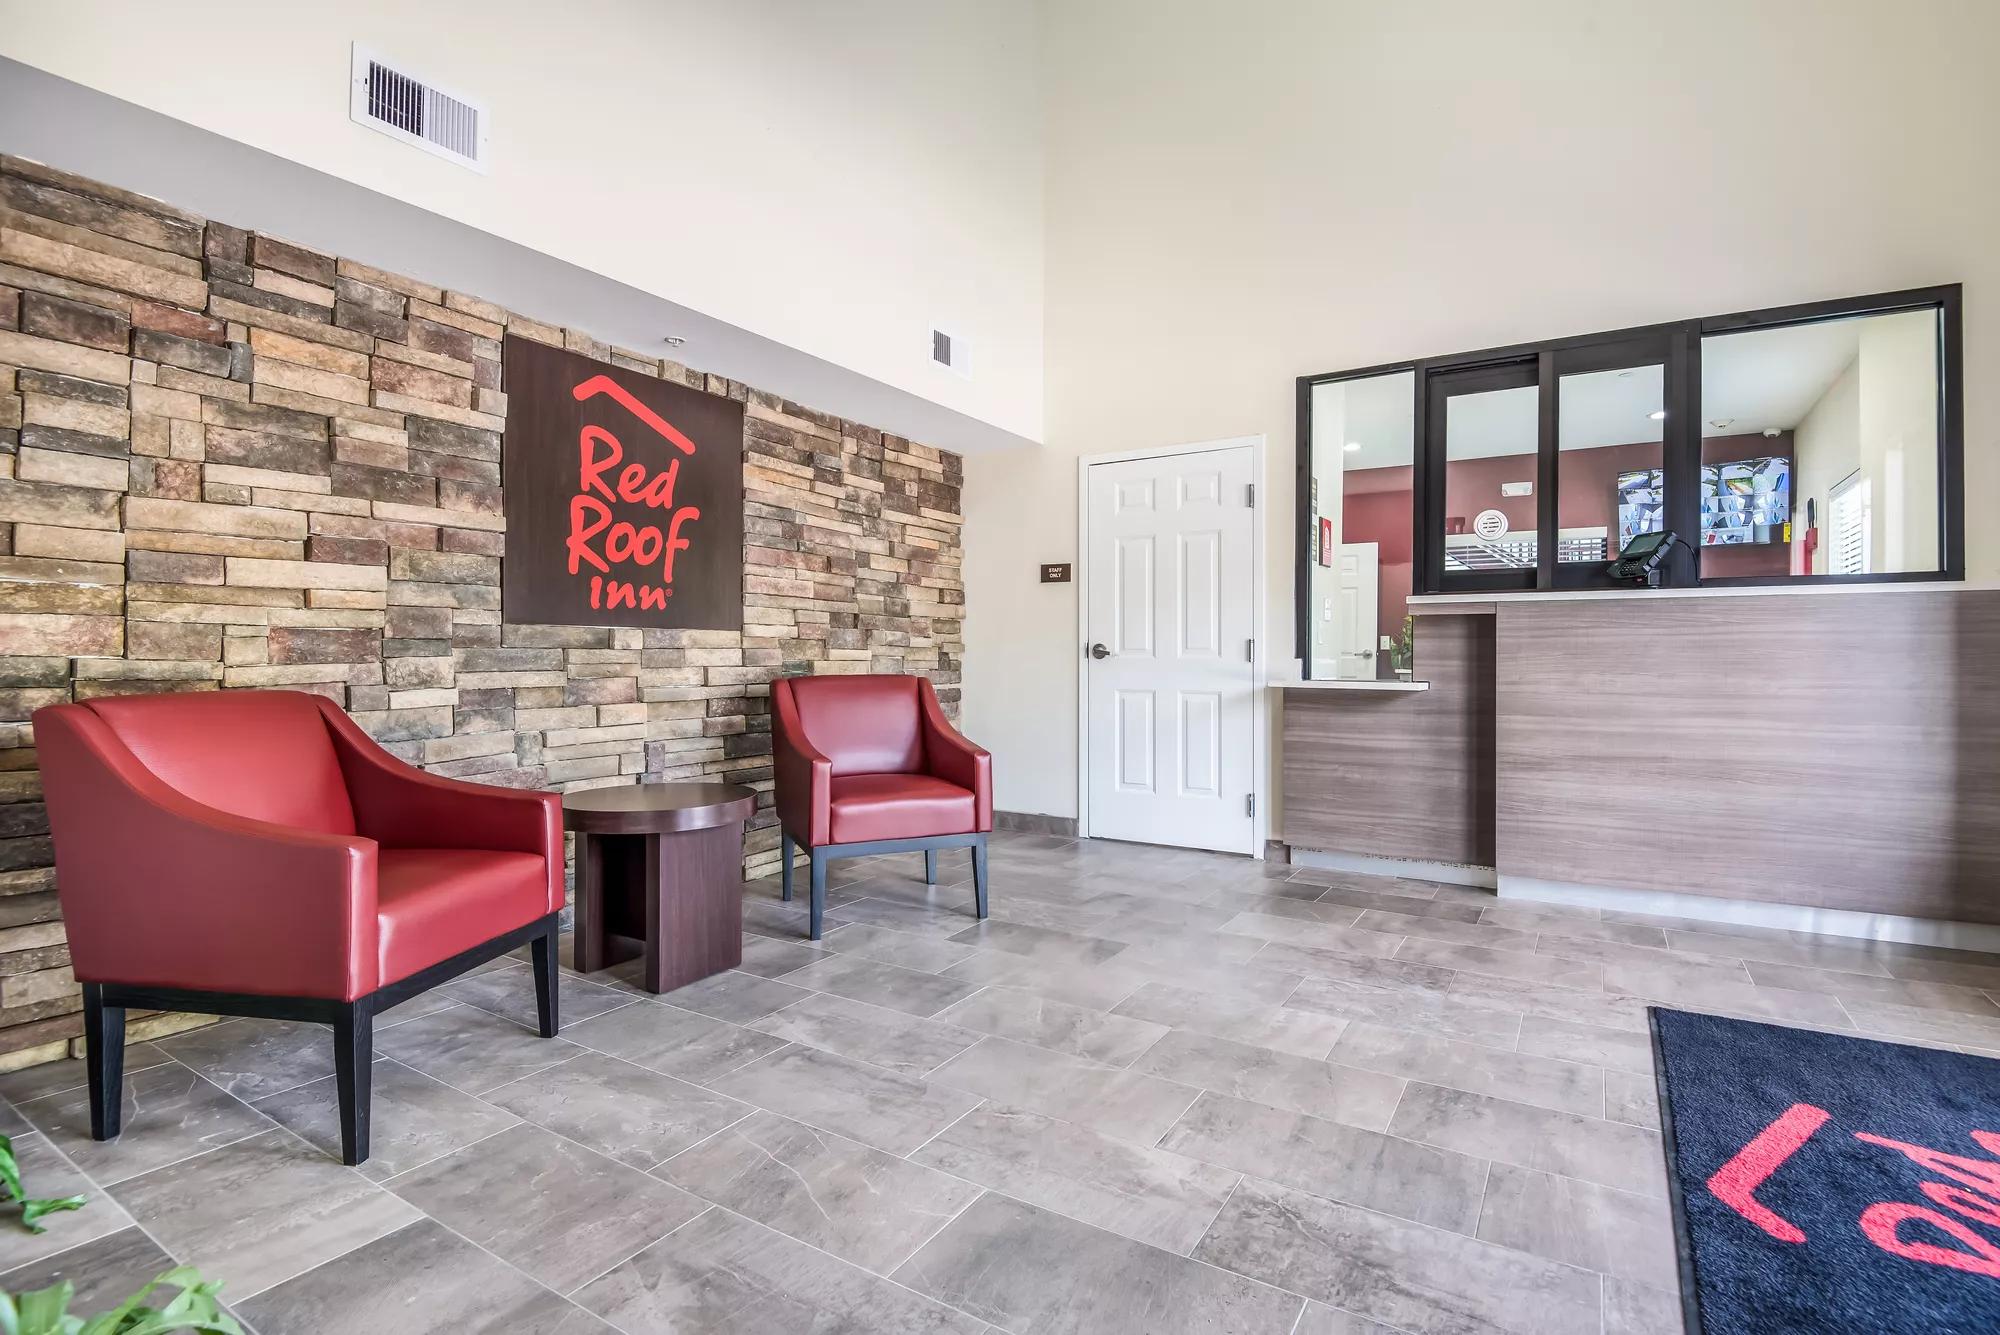 Red Roof Inn Baytown Front Desk and Lobby Image